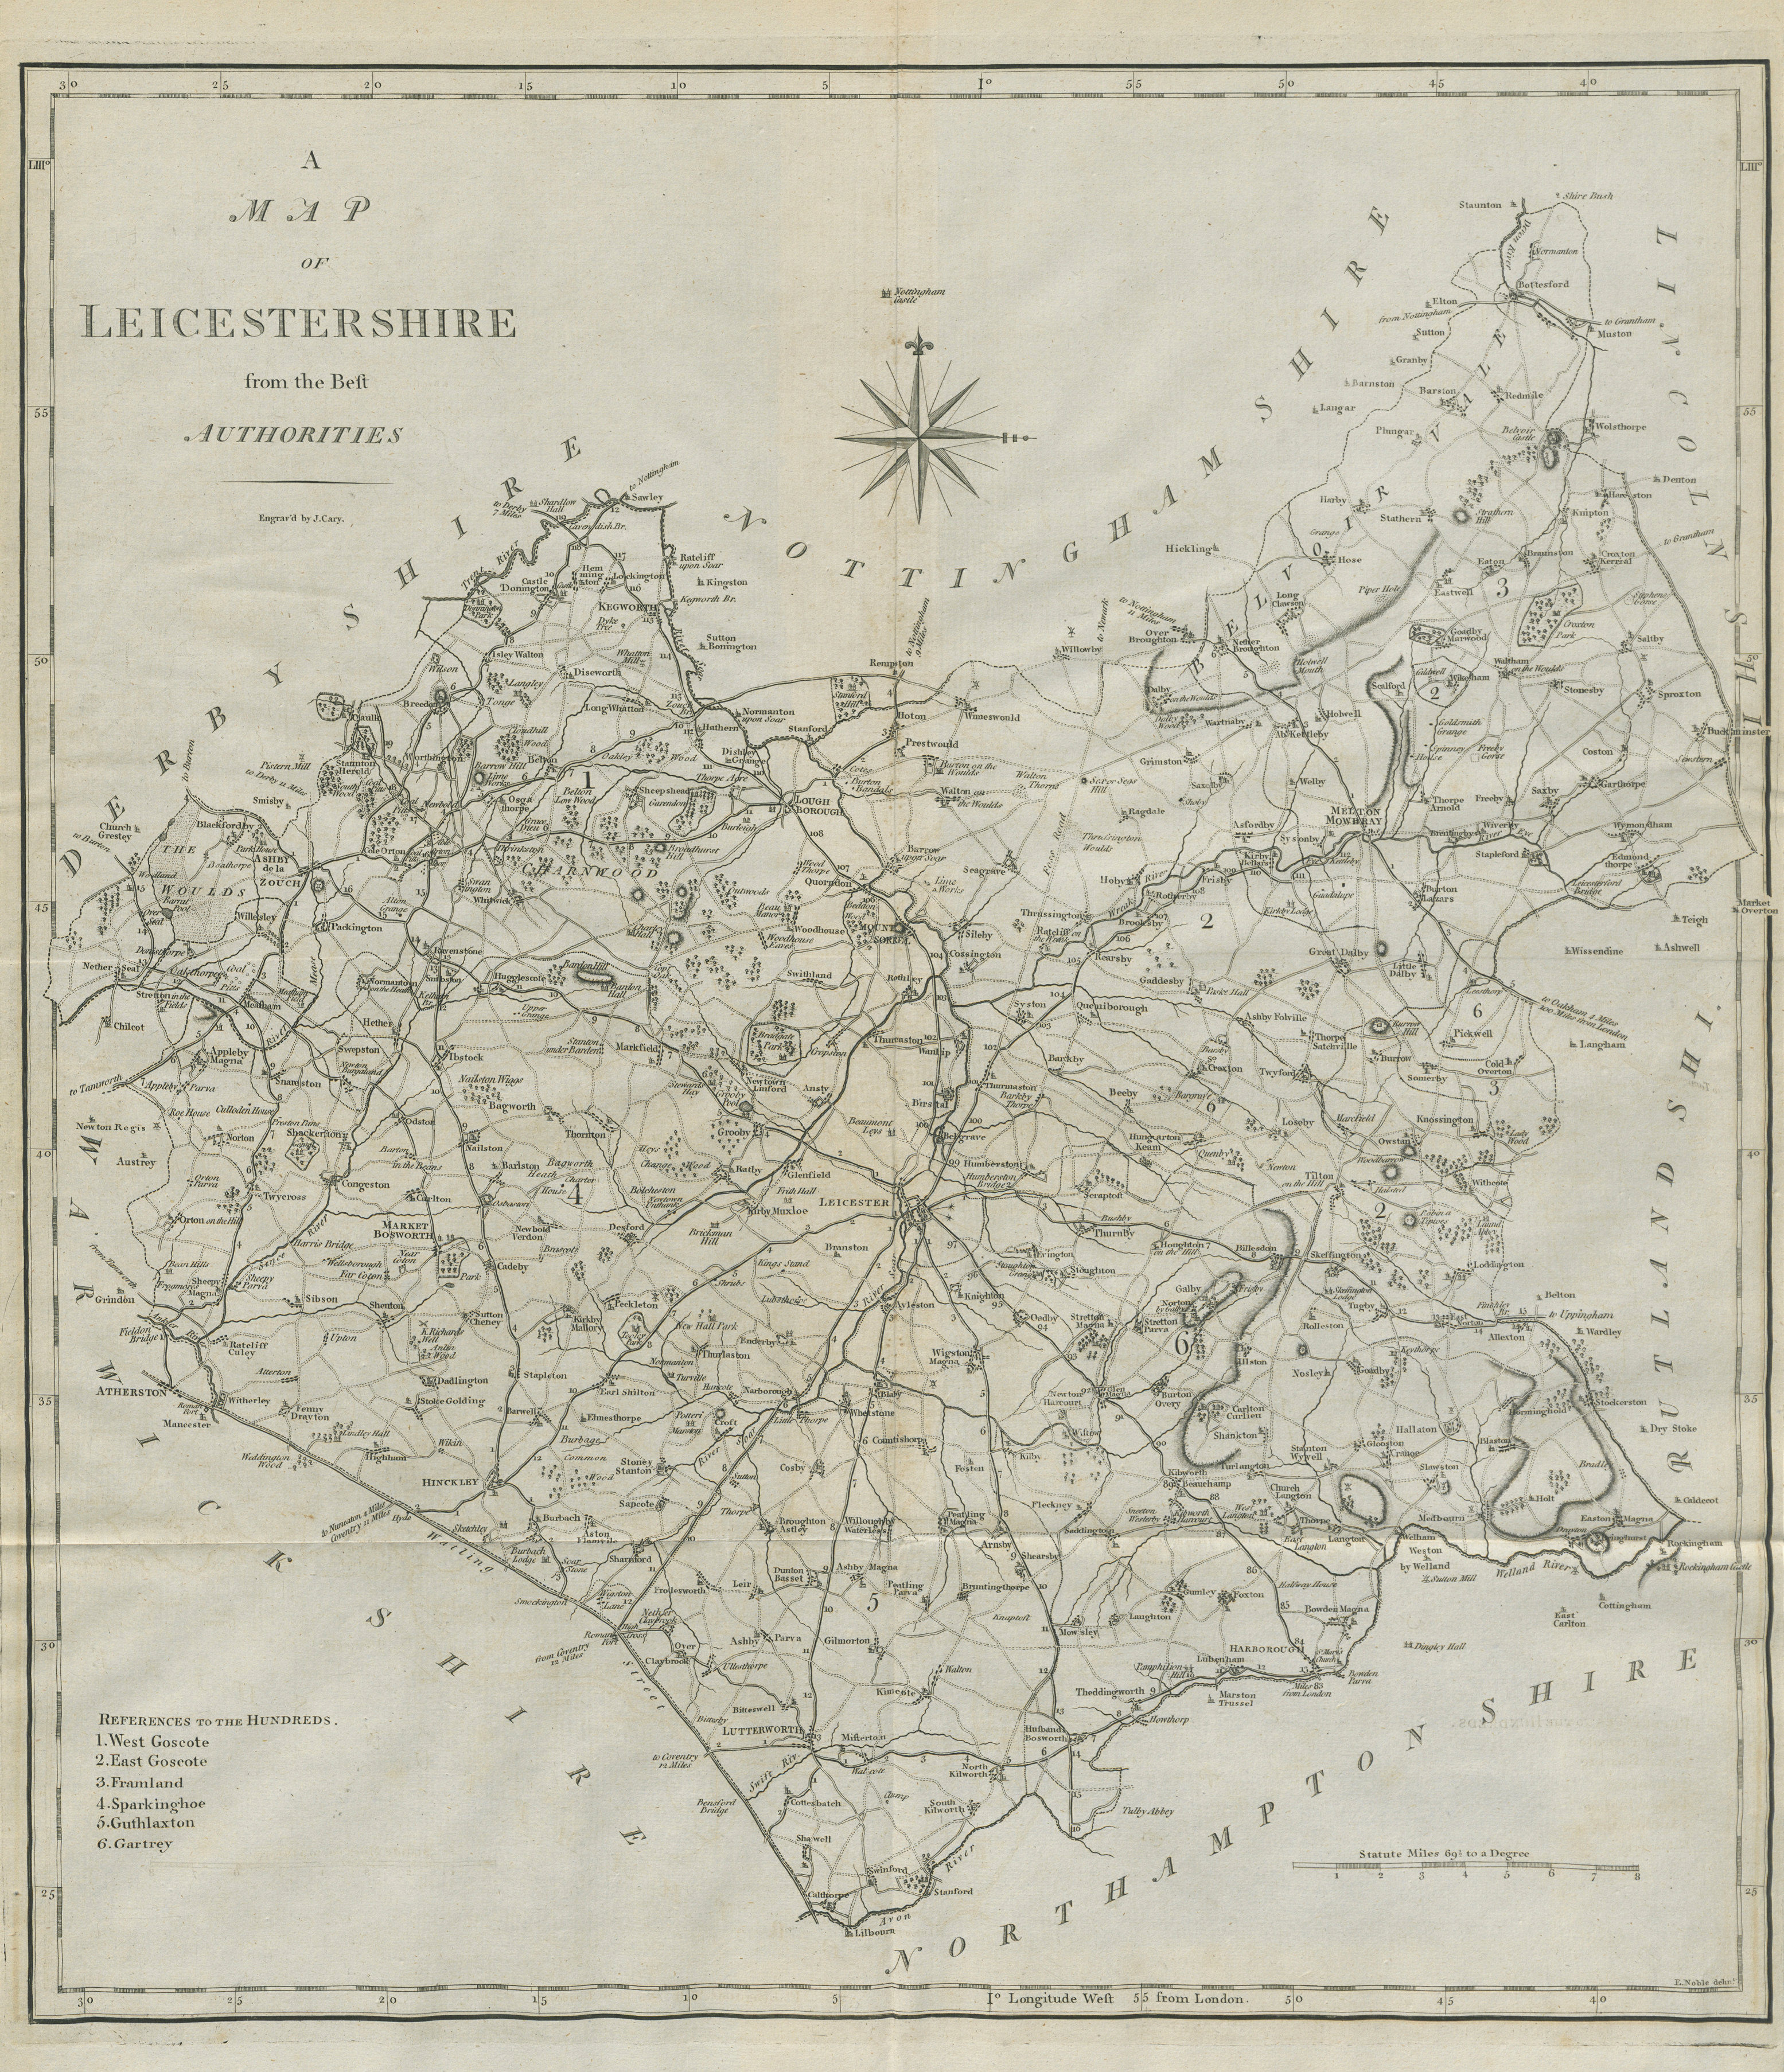 Associate Product "A map of Leicestershire from the best authorities". County map. CARY 1789